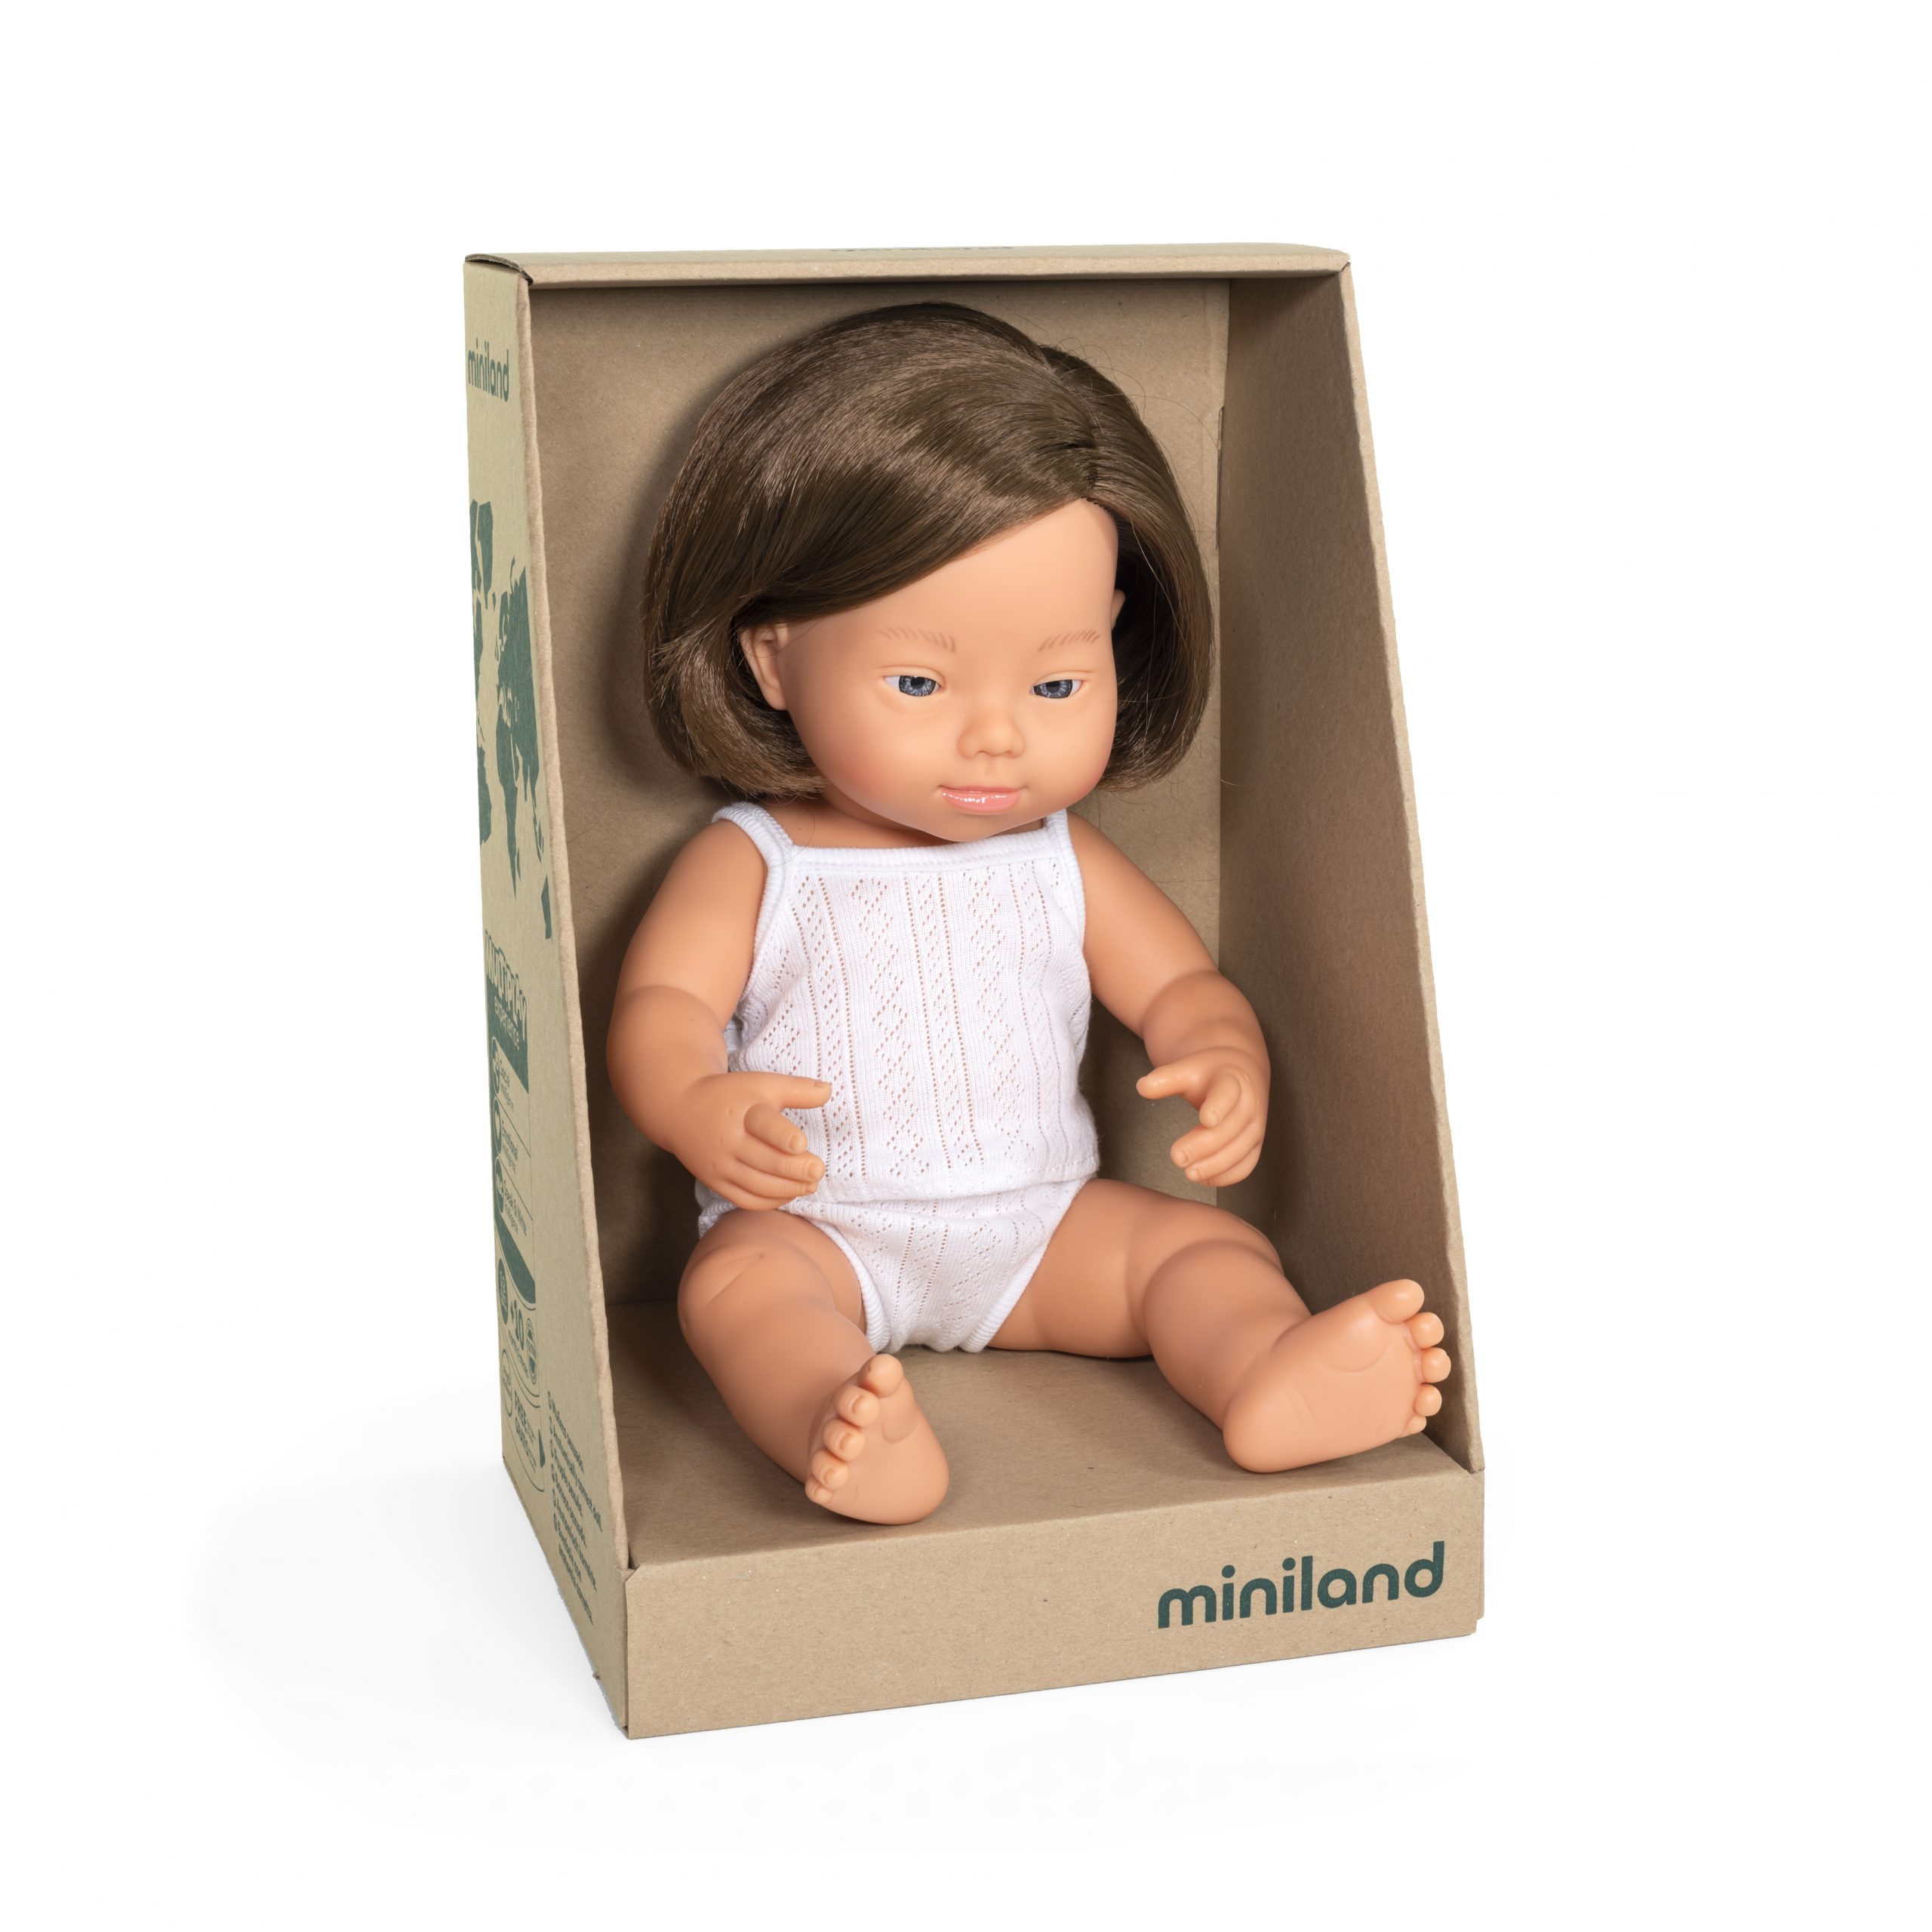 Caucasian Girl with Down Syndrome Doll (38cm)